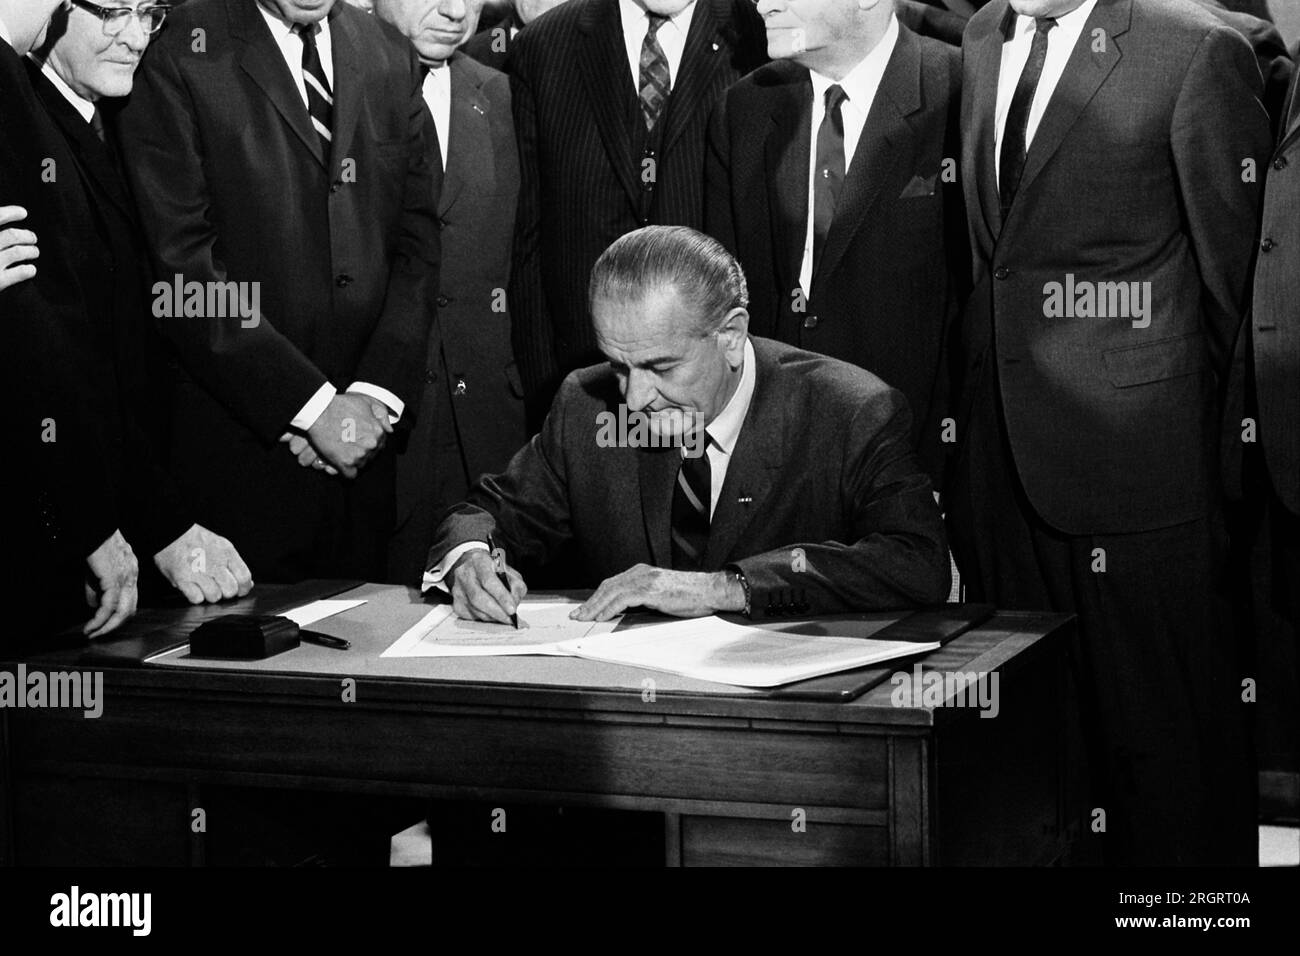 Washington, D.C.:  April 11, 1968 President Lyndon Johnson signs the Civil Rights bill while seated at a table surrounded by members of Congress. Stock Photo